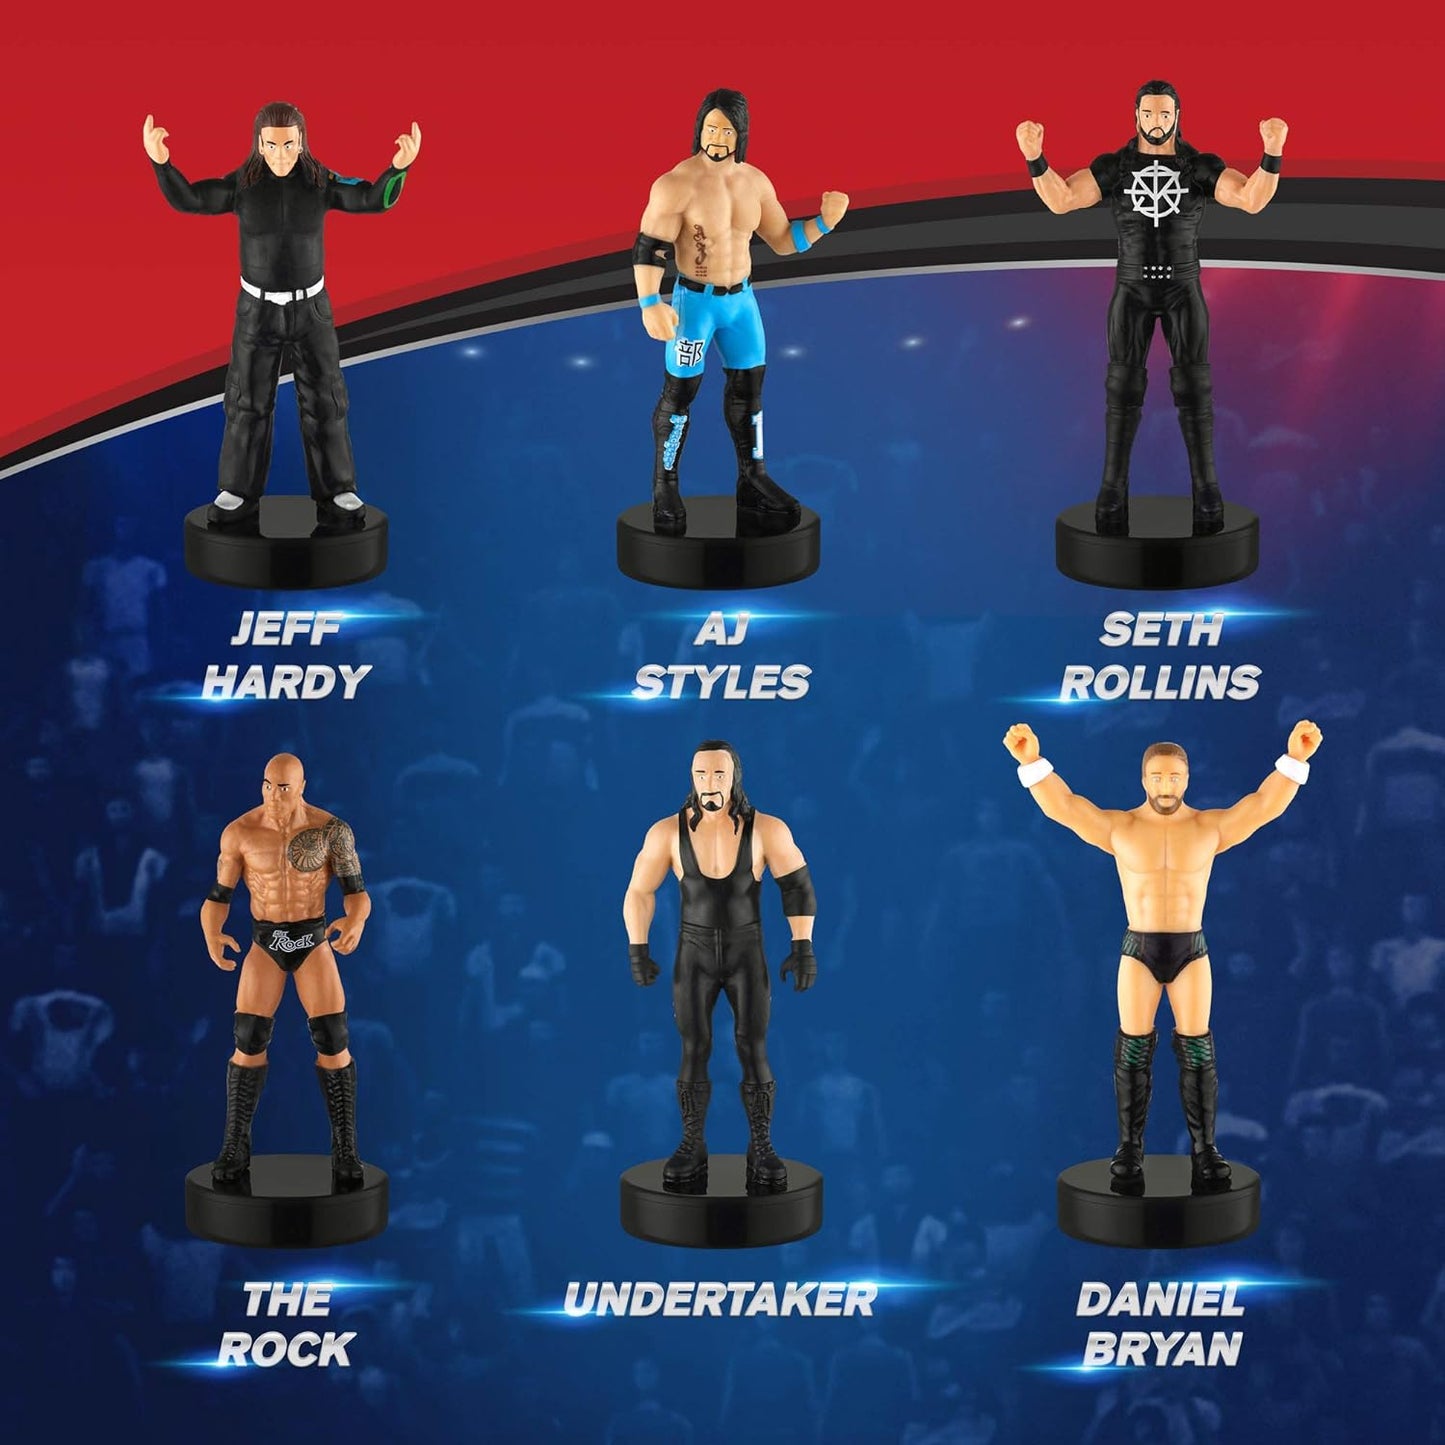 2020 WWE PMI Stampers 12-Pack Deluxe Box [Version 1]